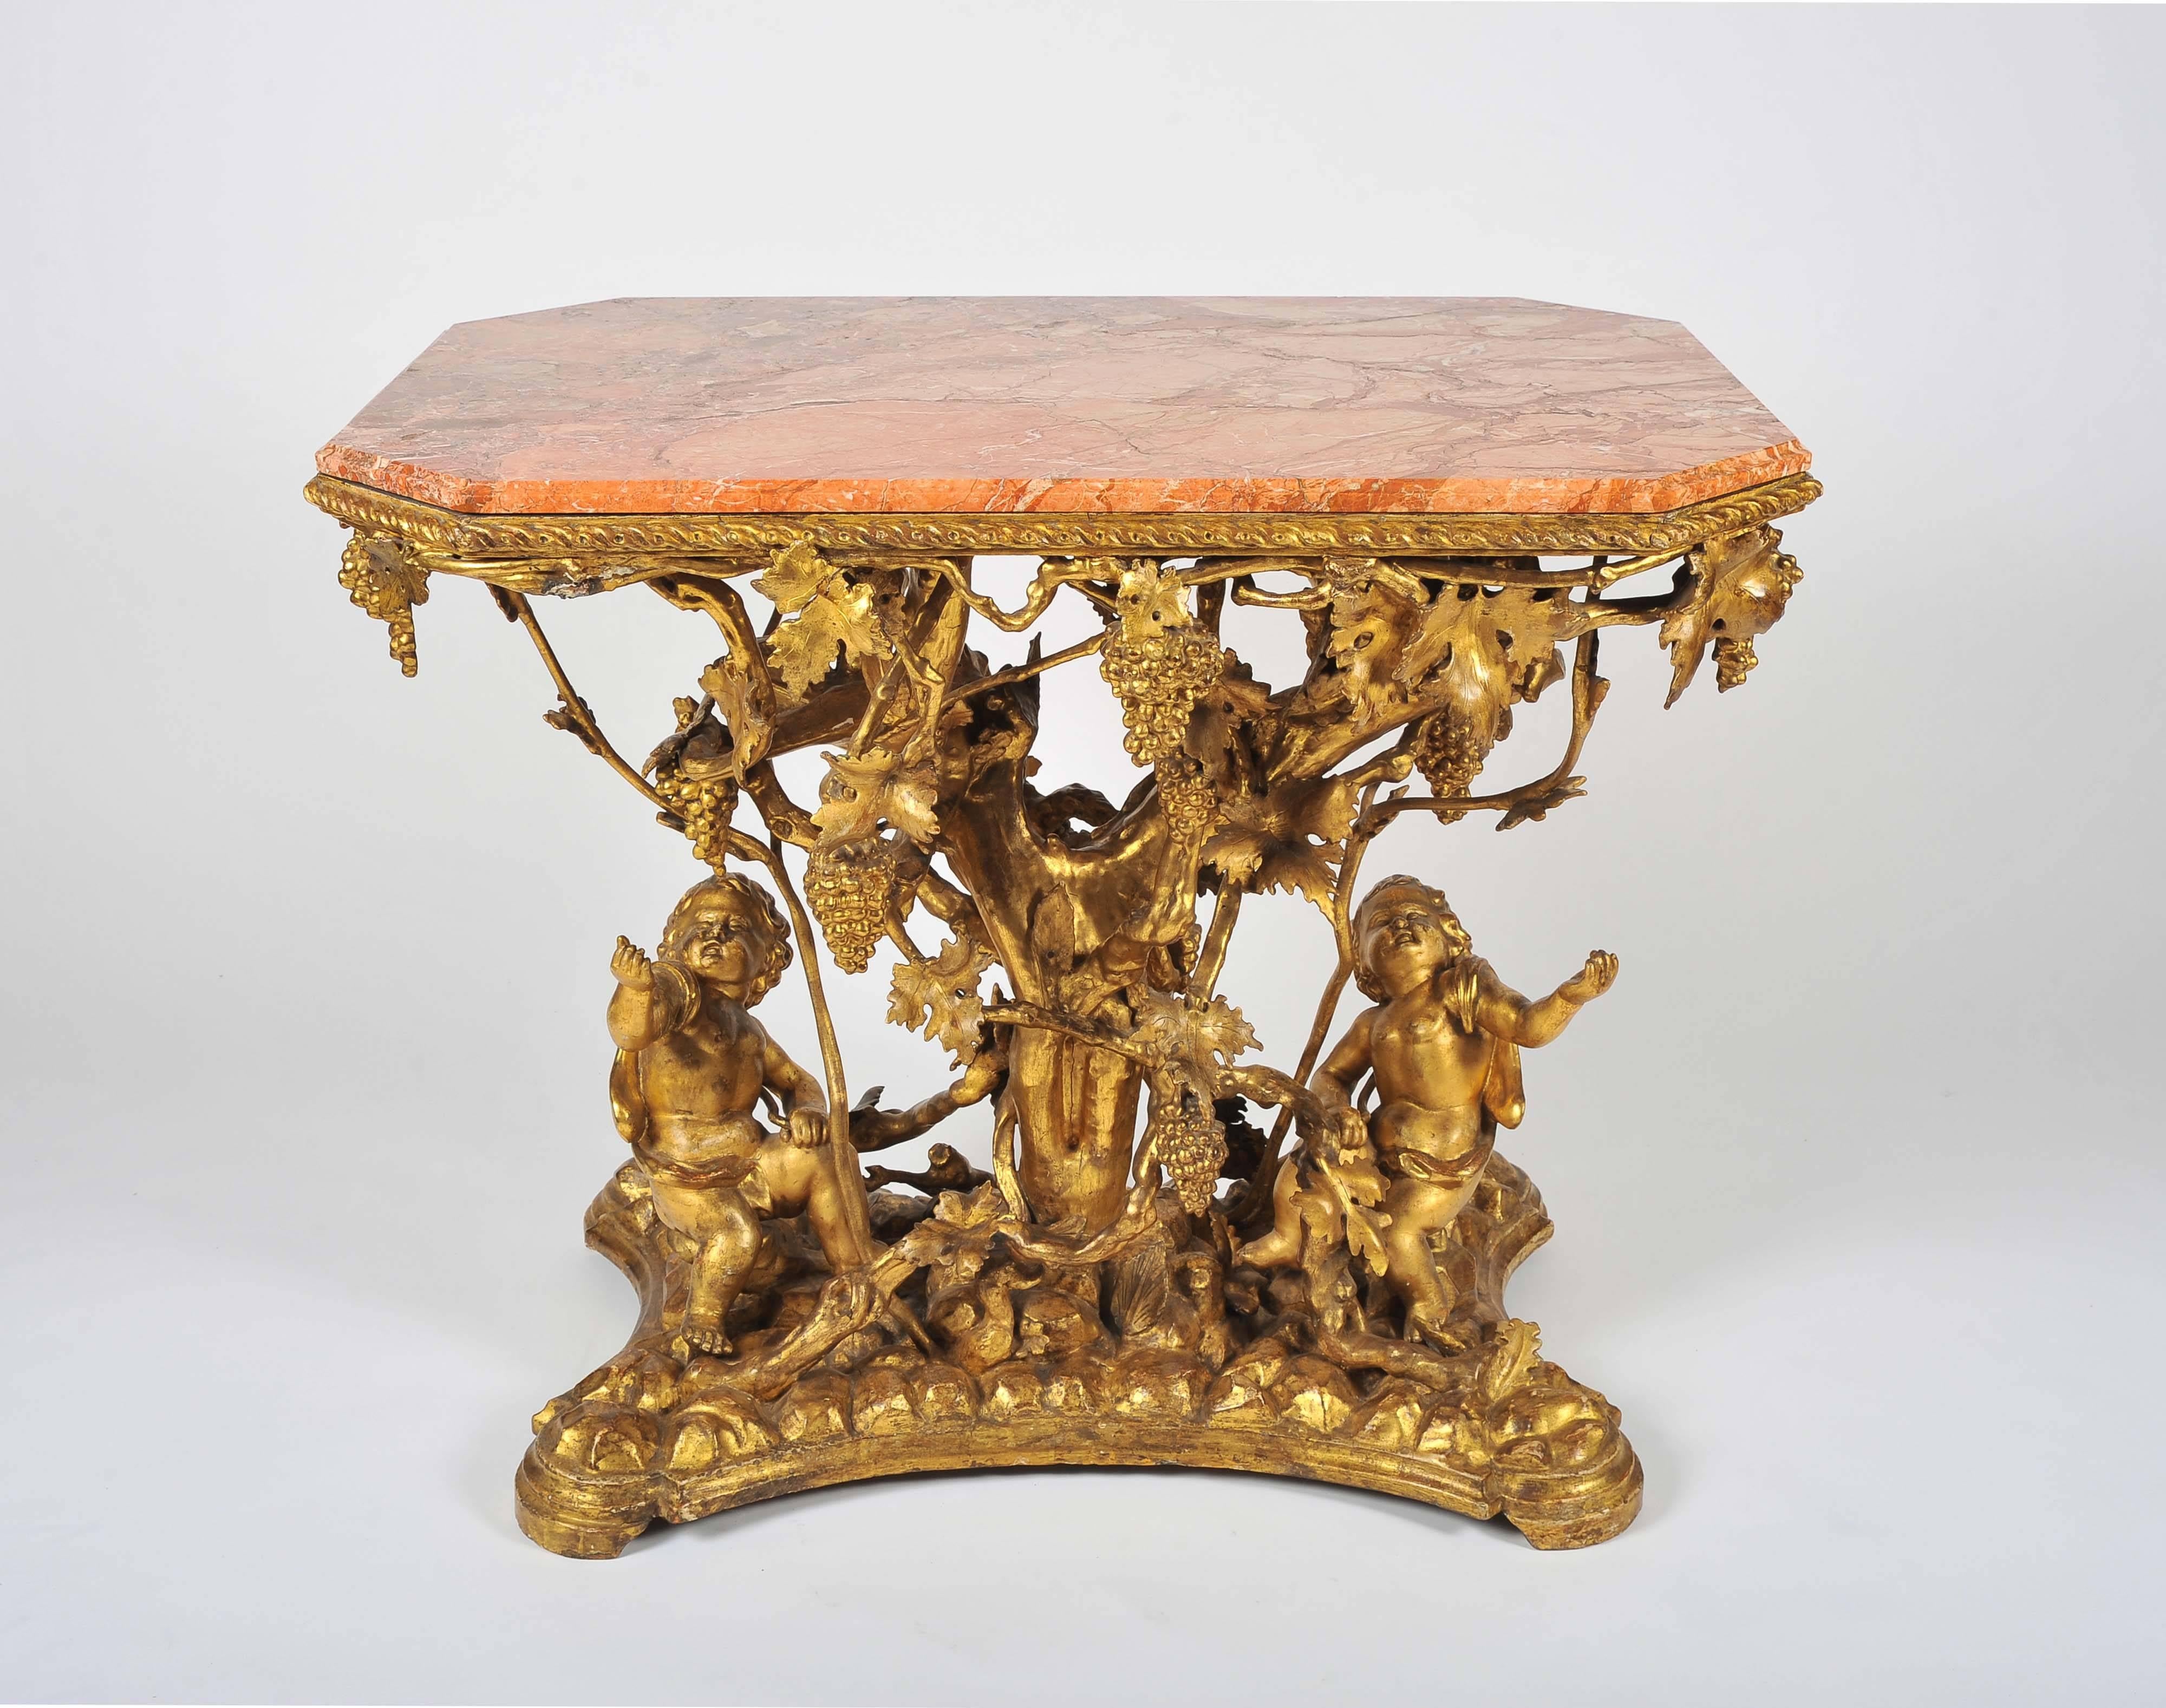 An extraordinary console or centre table, the base with carved wood and gilt gesso formed of Bacchanalian putti amongst a vine with branches, leaves and bunches of grapes, on a simulated rocky ground. The gilding a wonderful warm gold, slight rubbed